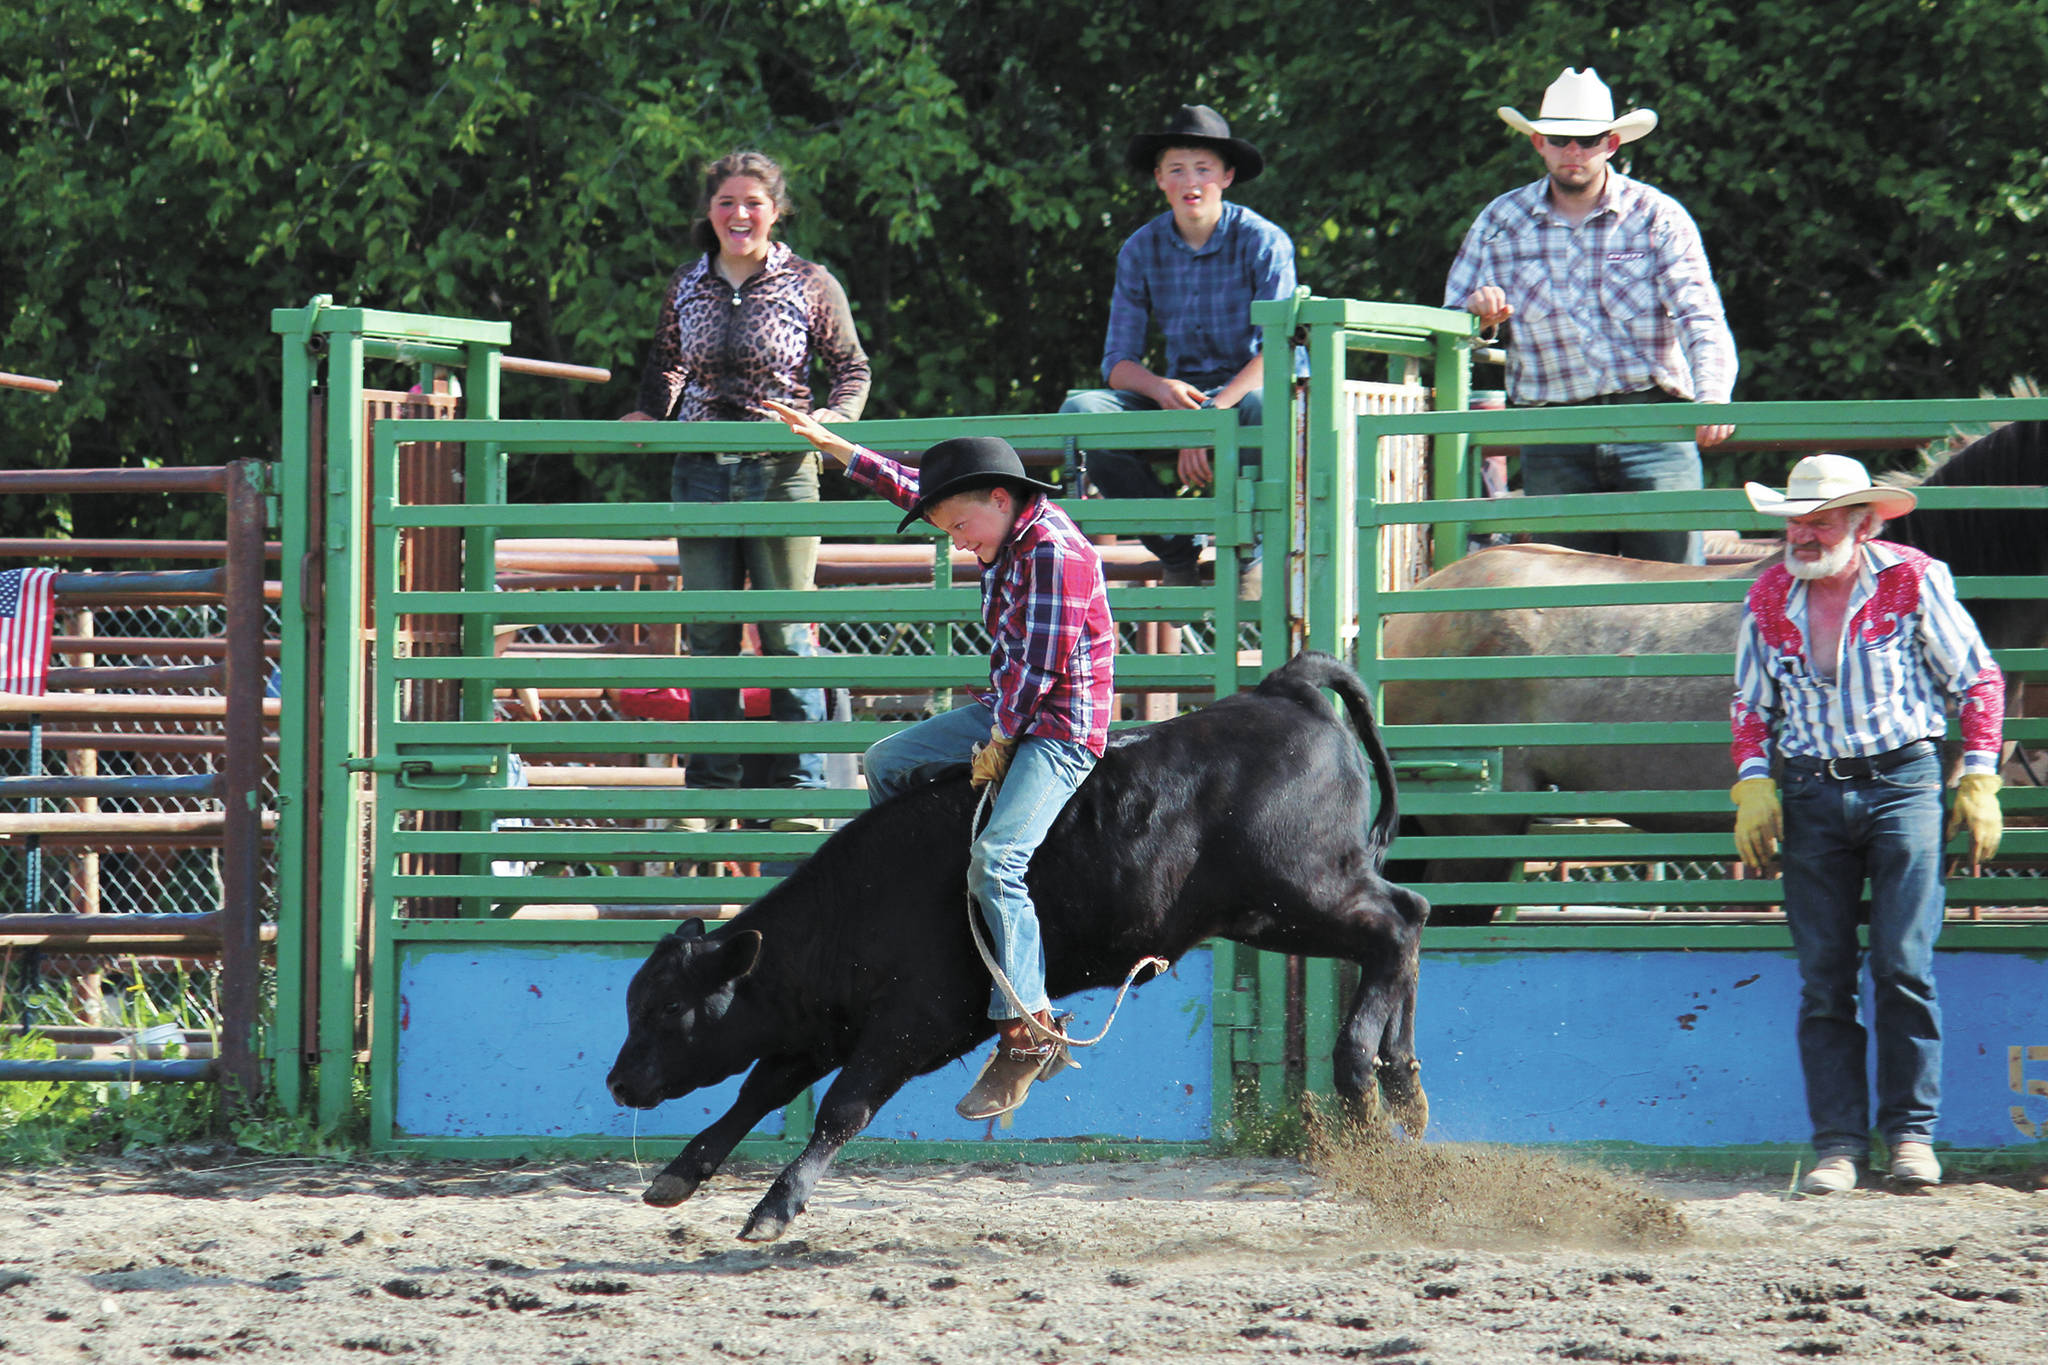 photos by Megan Pacer / Homer News                                 A youth rider takes a turn riding a bull calf during the 60th annual Ninilchik Rodeo on Saturday, July 4 at the Kenai Peninsula Fairgrounds in Ninilchik. The rodeo lasted throughout the July Fourth holiday and celebrated a return to the event’s roots.